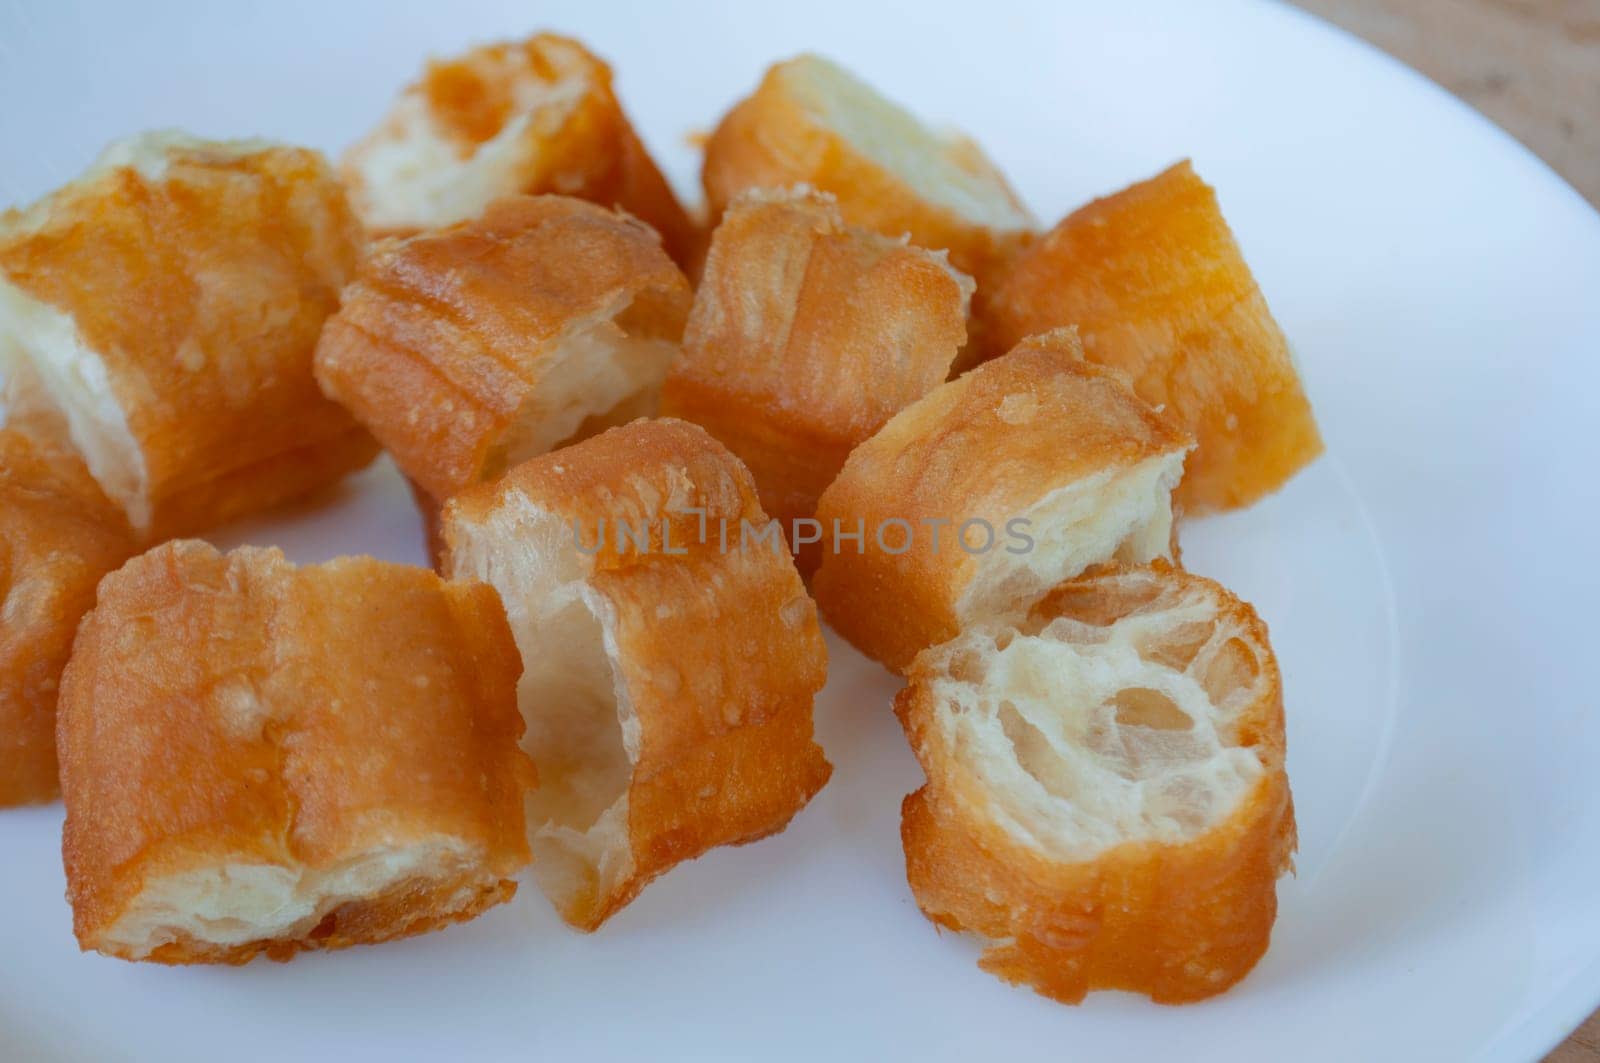 Close up view of cut cakoi or youtiao cake on white plate. Asian food concept